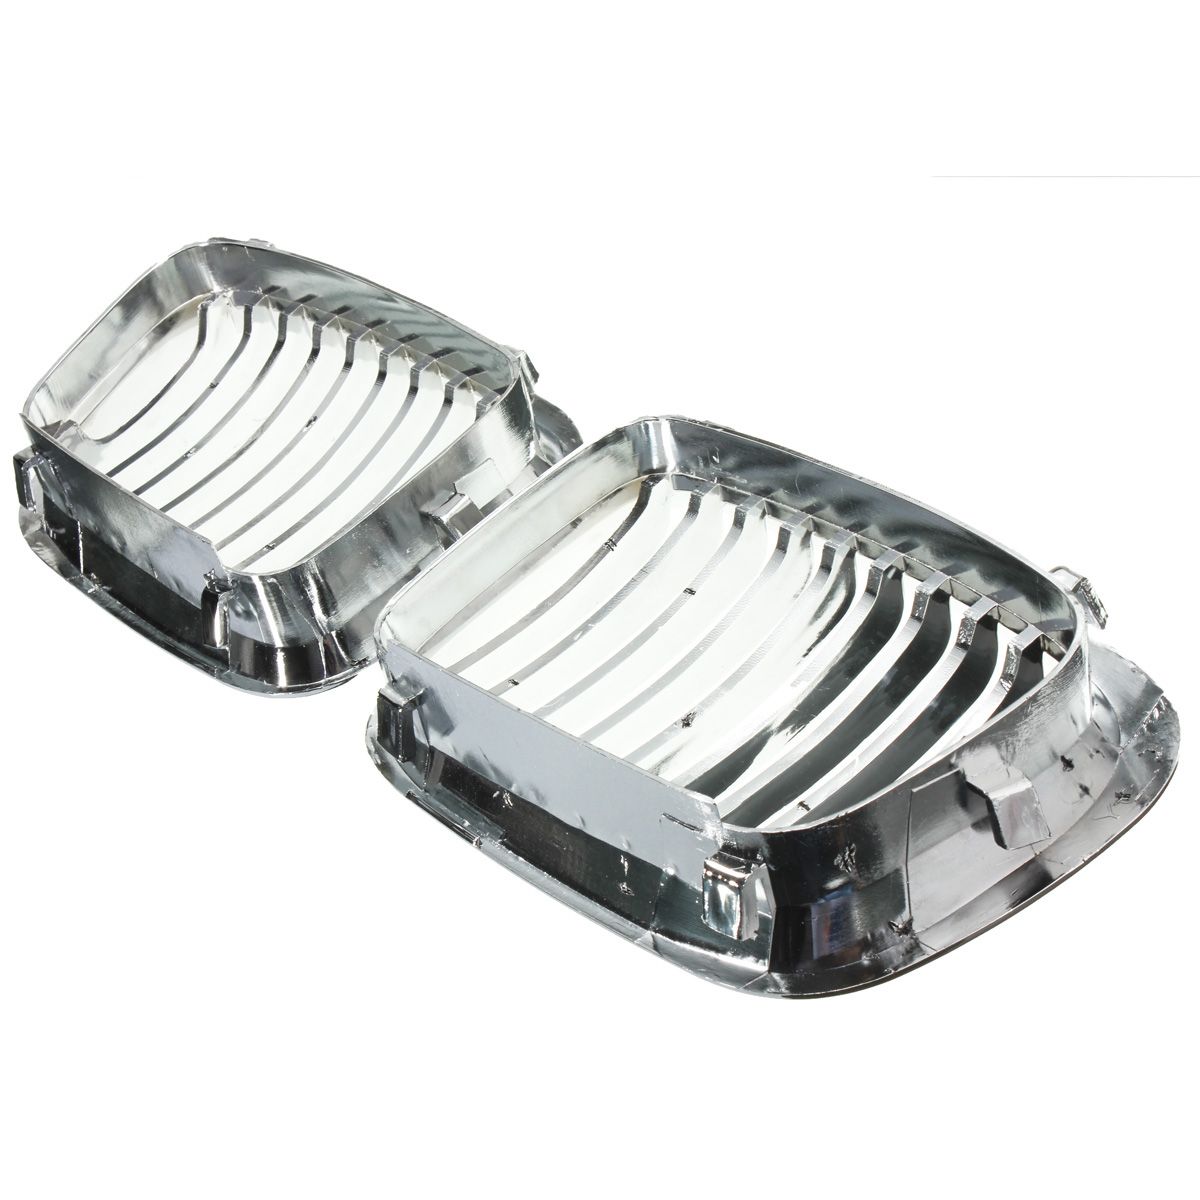 Front-Kidney-Chrome-Glossy-Grill-Grille-For-BMW-E46-3-Series-4-Door-4-DR-97-01-1049647